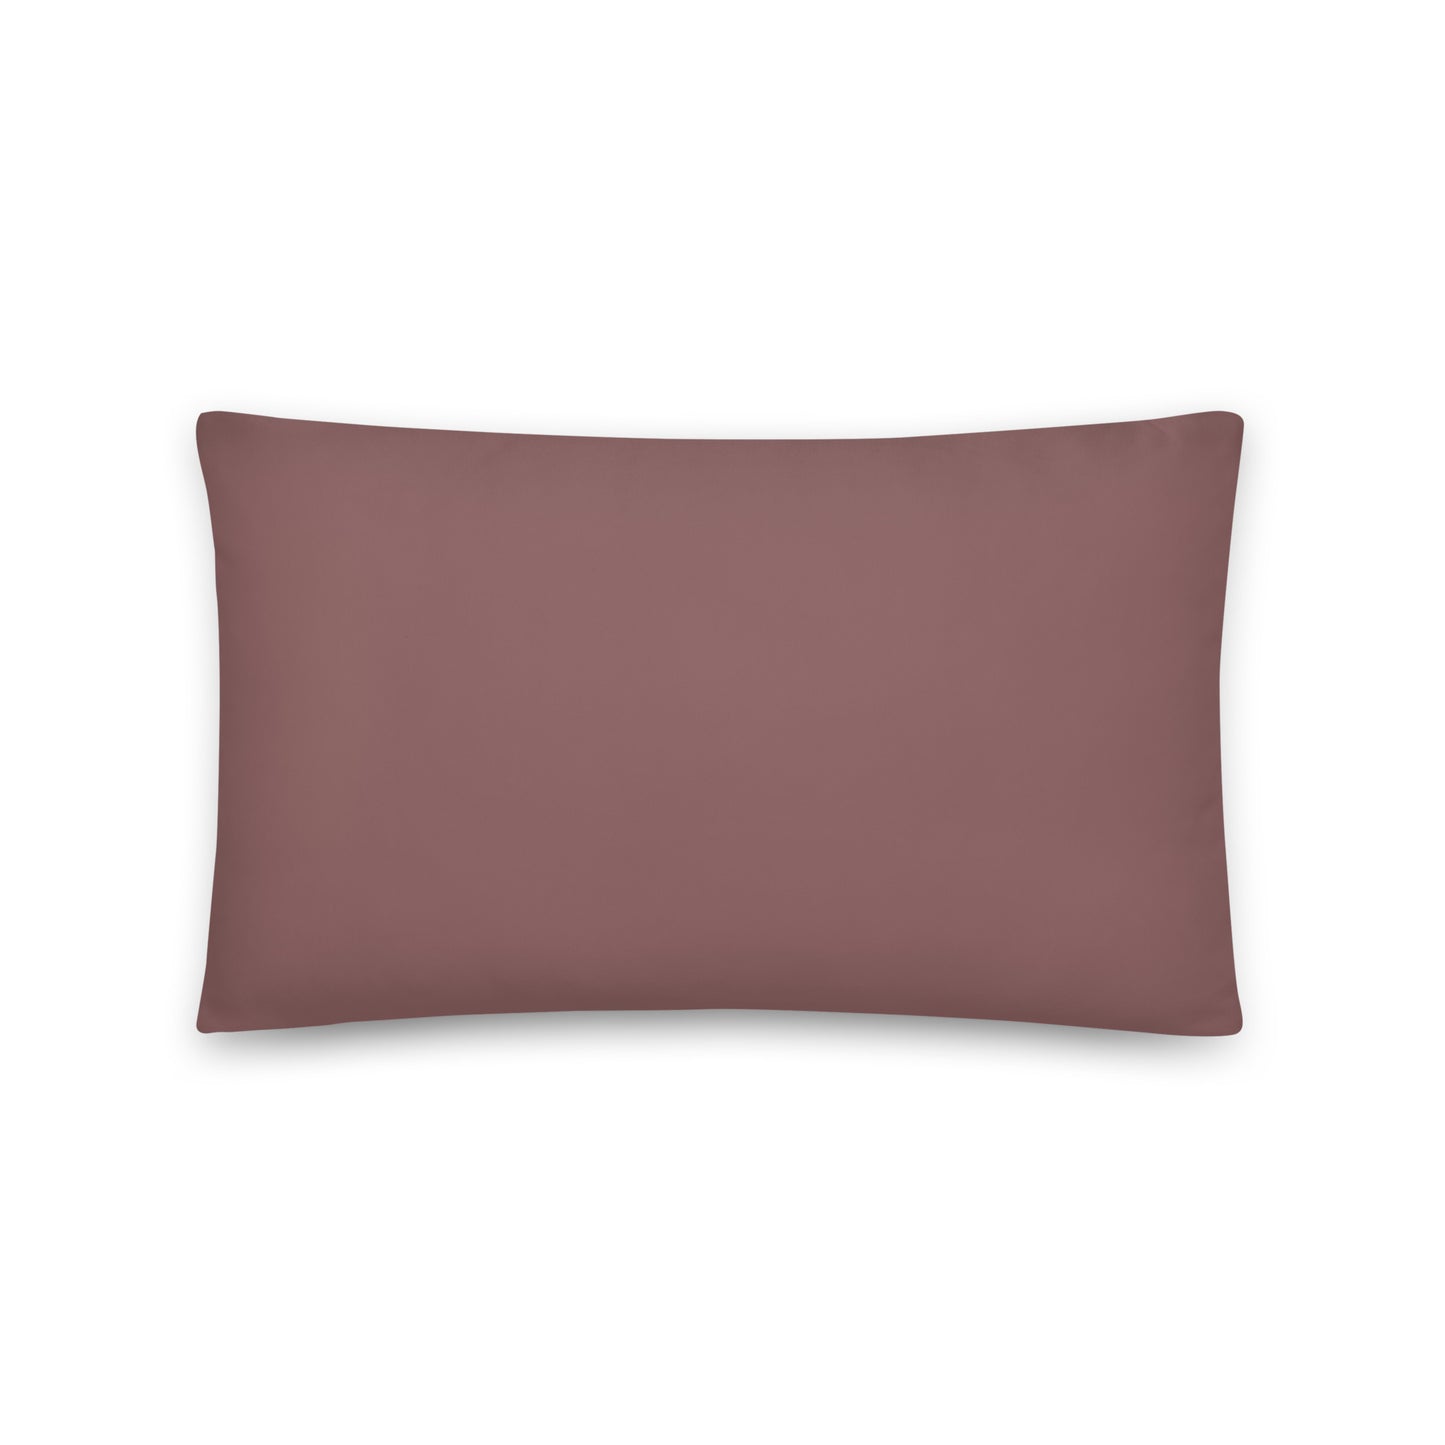 Basic Pinkish Brown - Sustainably Made Pillows